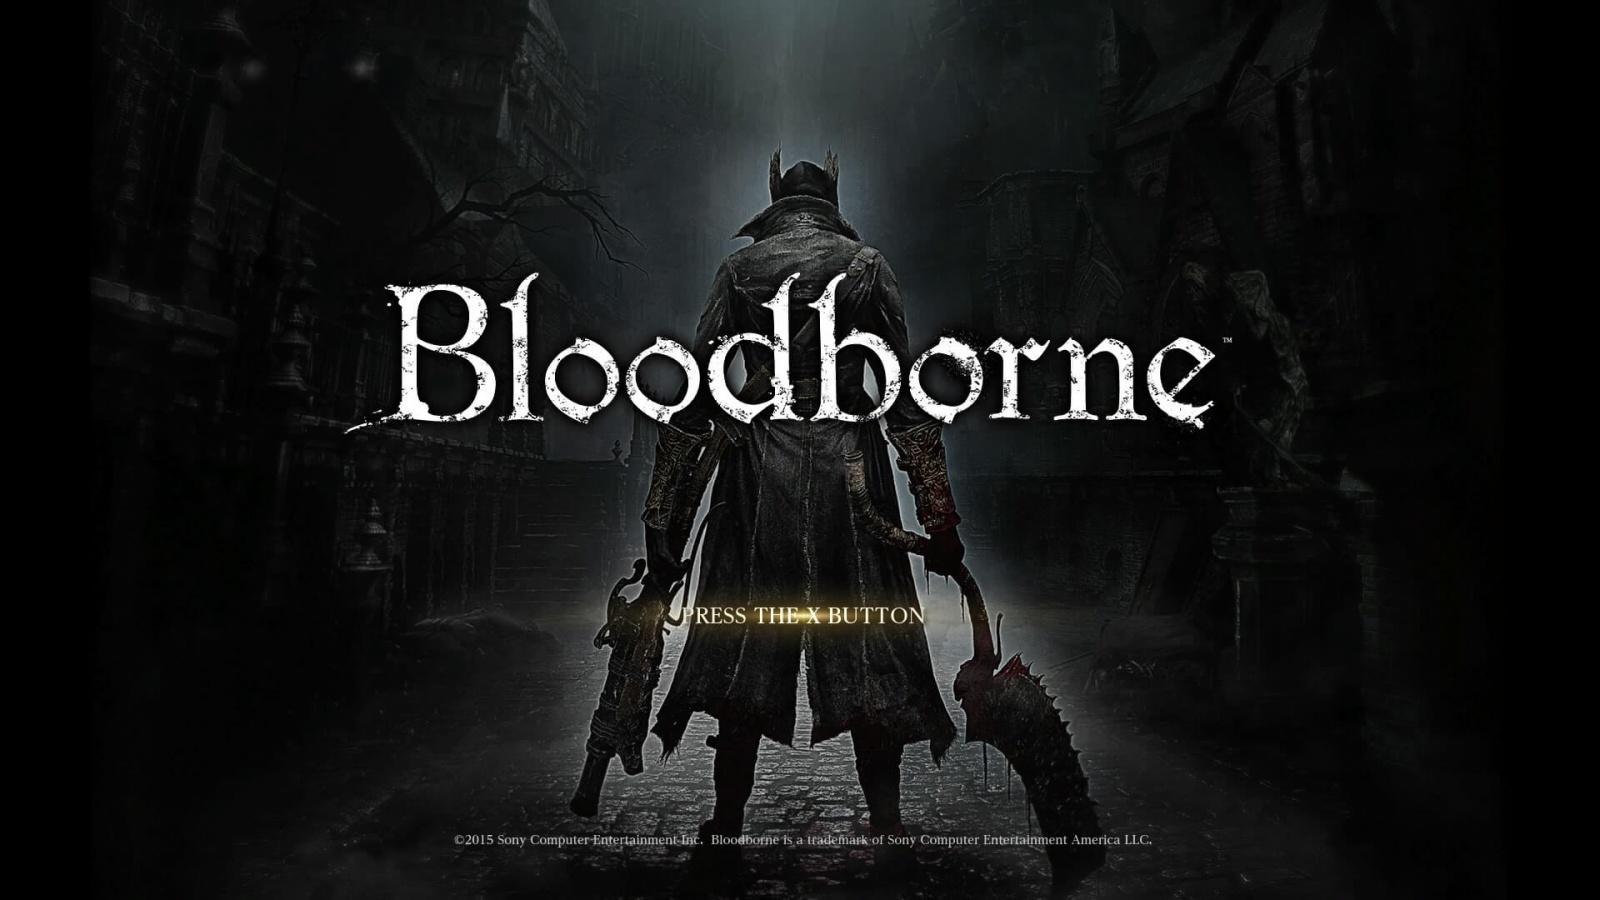 Fake Bloodborne Mobile game tries scamming players for “premium